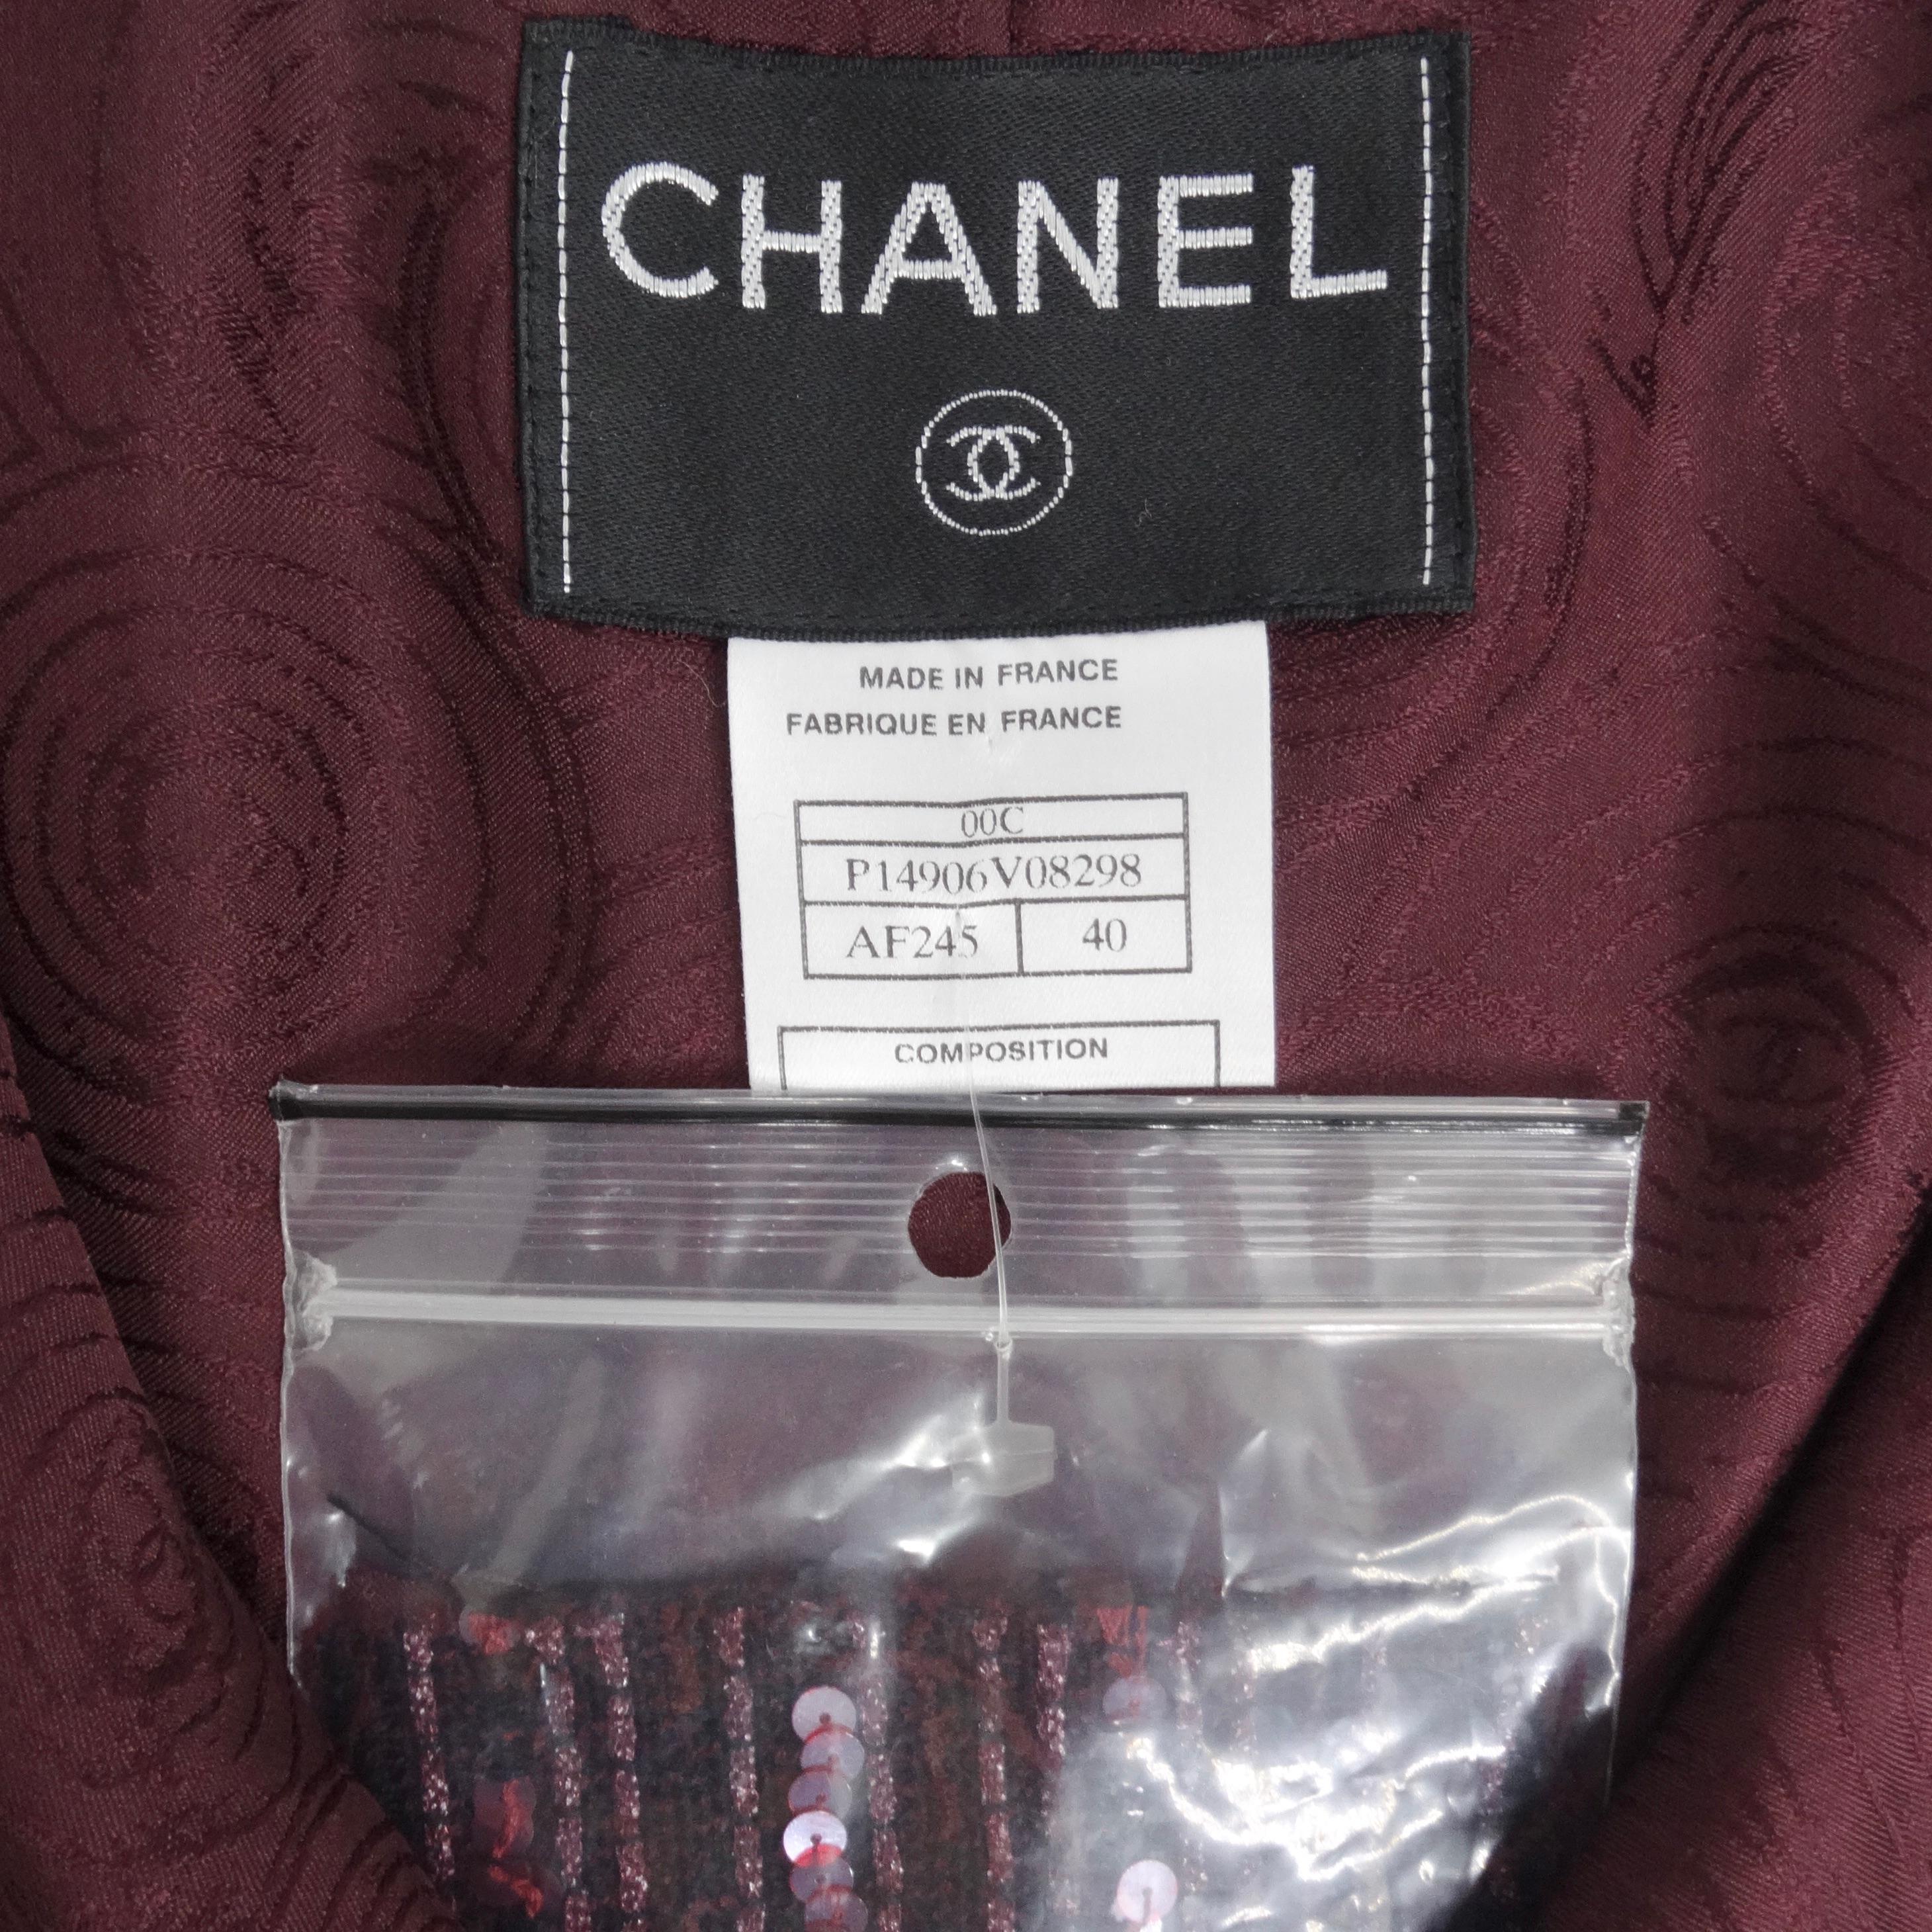 Chanel Cruise 2000 Sequin Evening Jacket For Sale 4